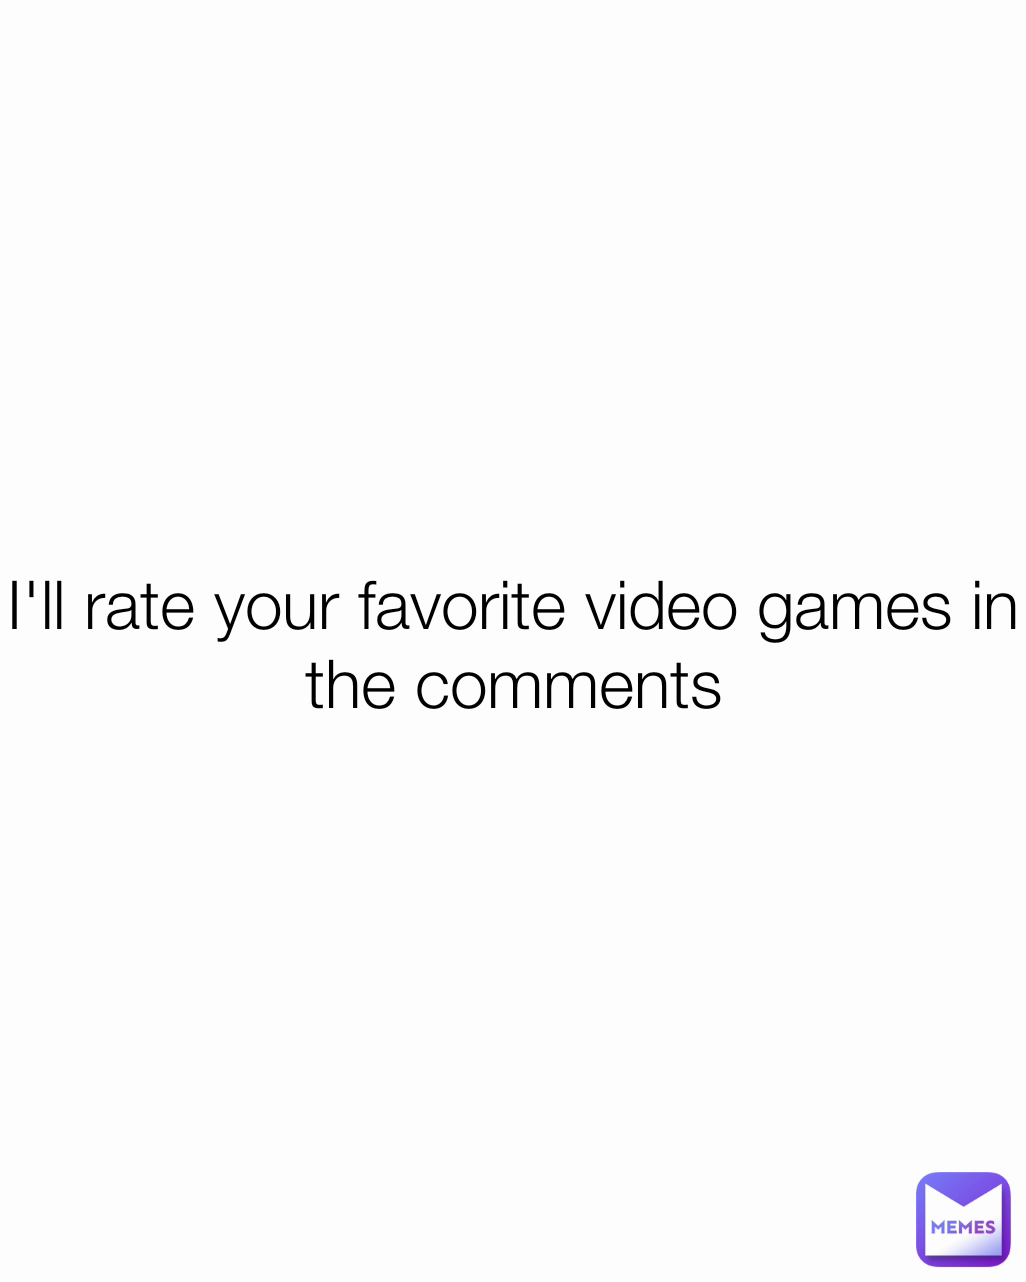 I'll rate your favorite video games in the comments